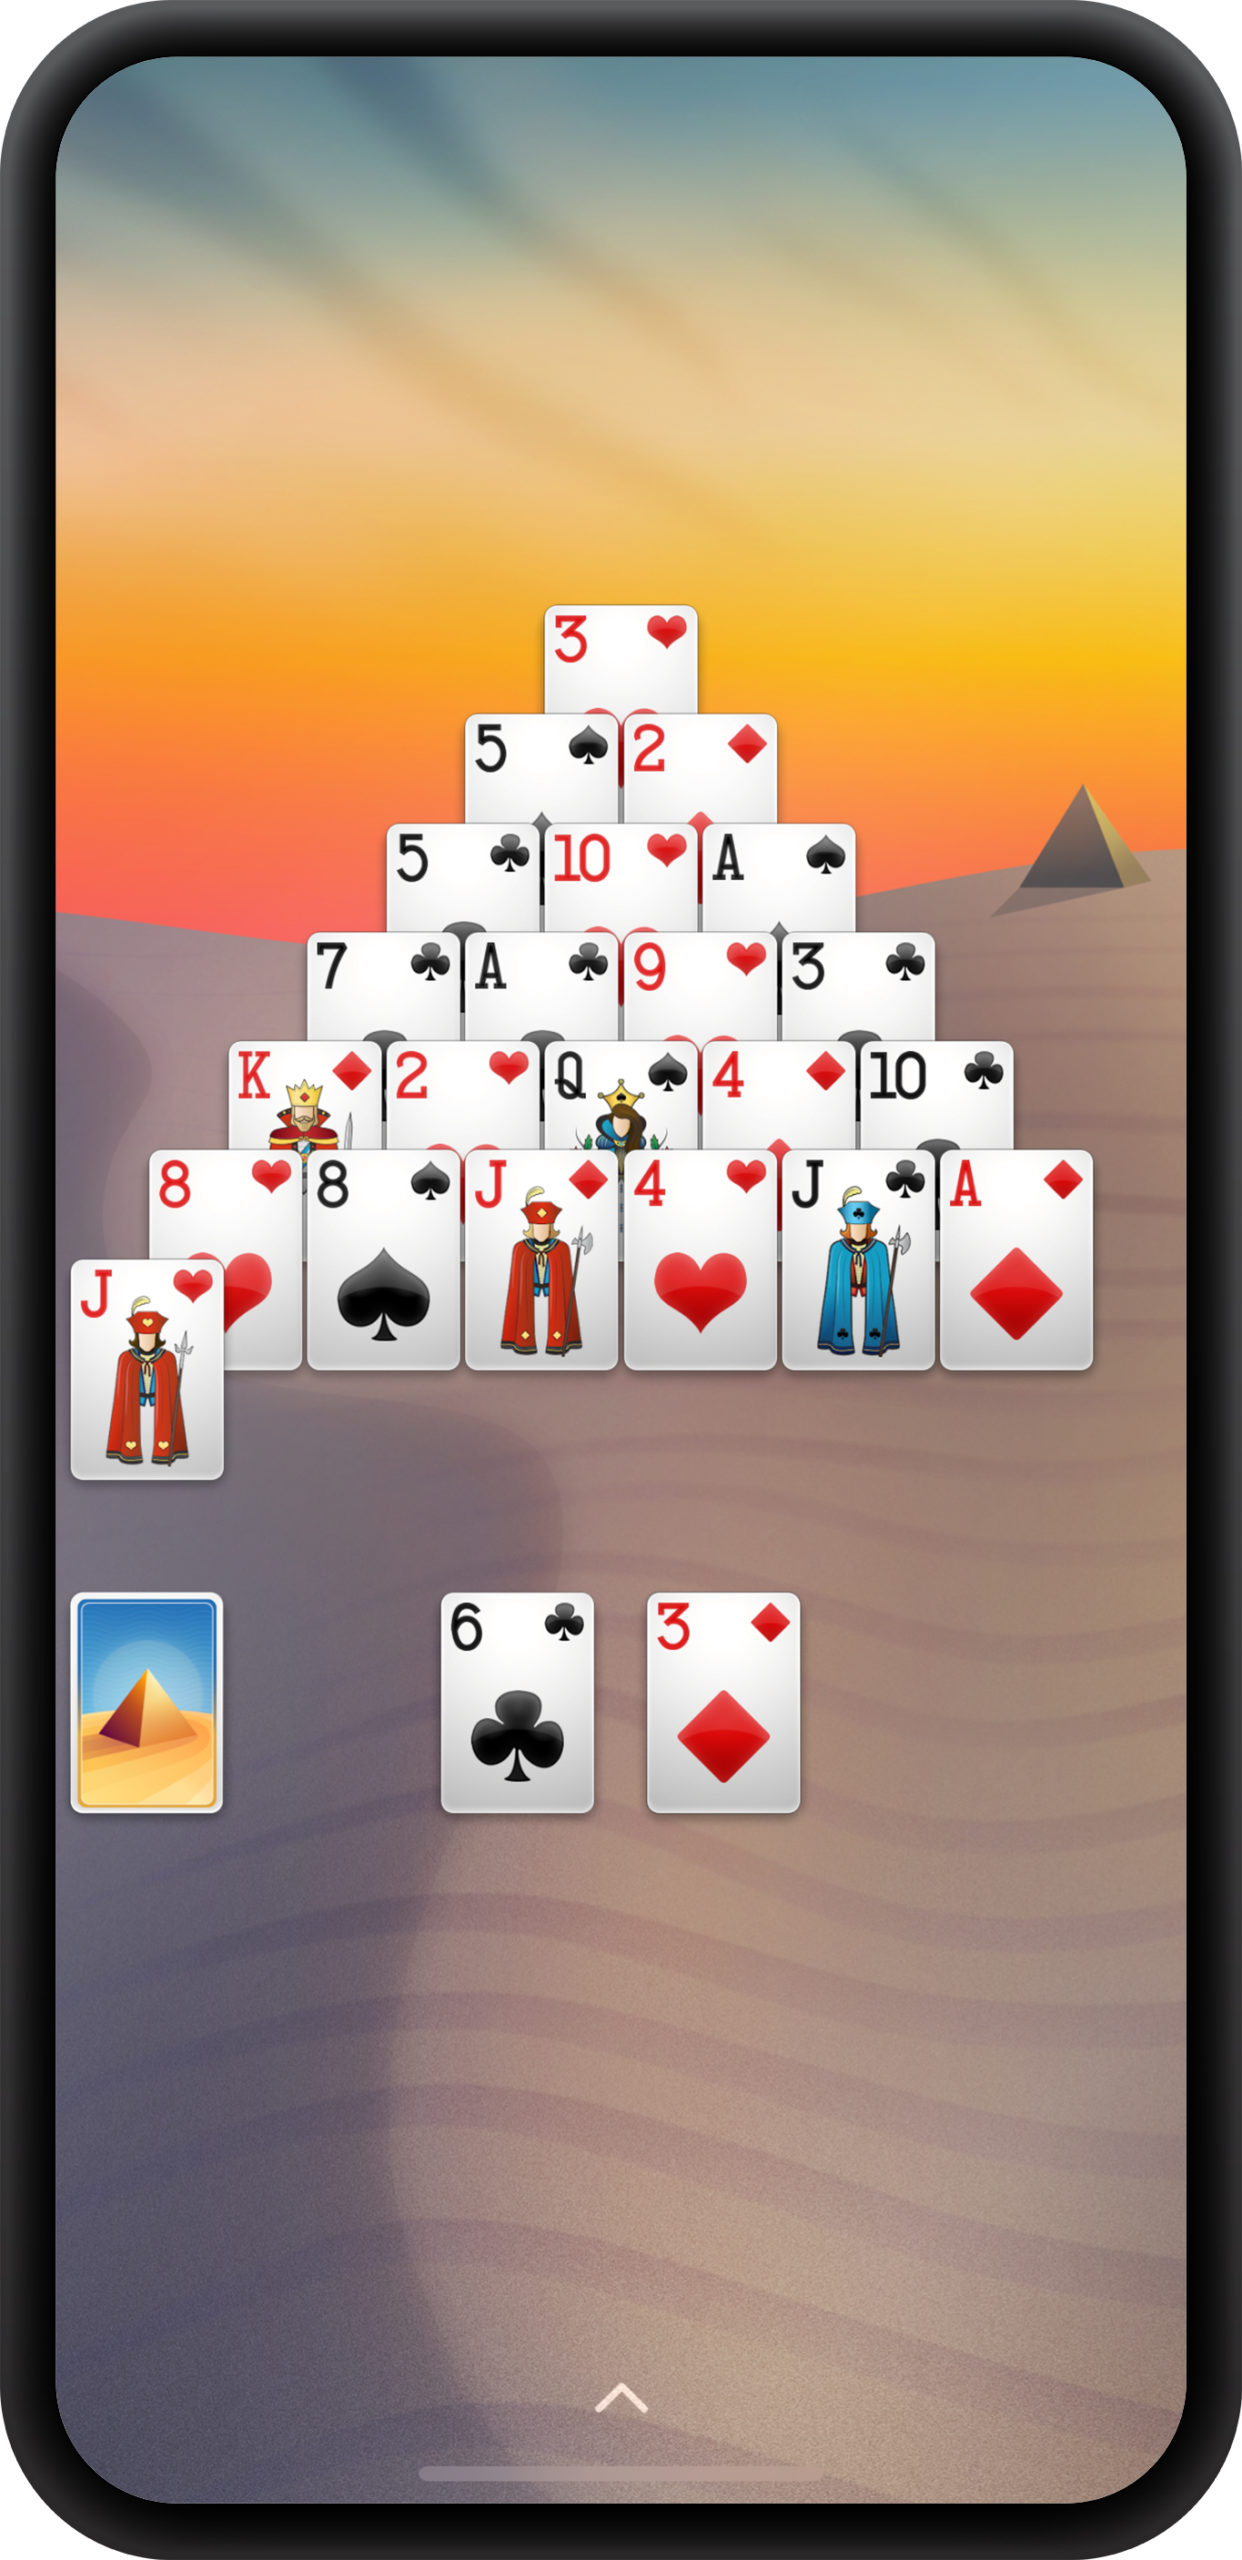 FunGamePlay Pyramid Solitaire - Free Play & No Download